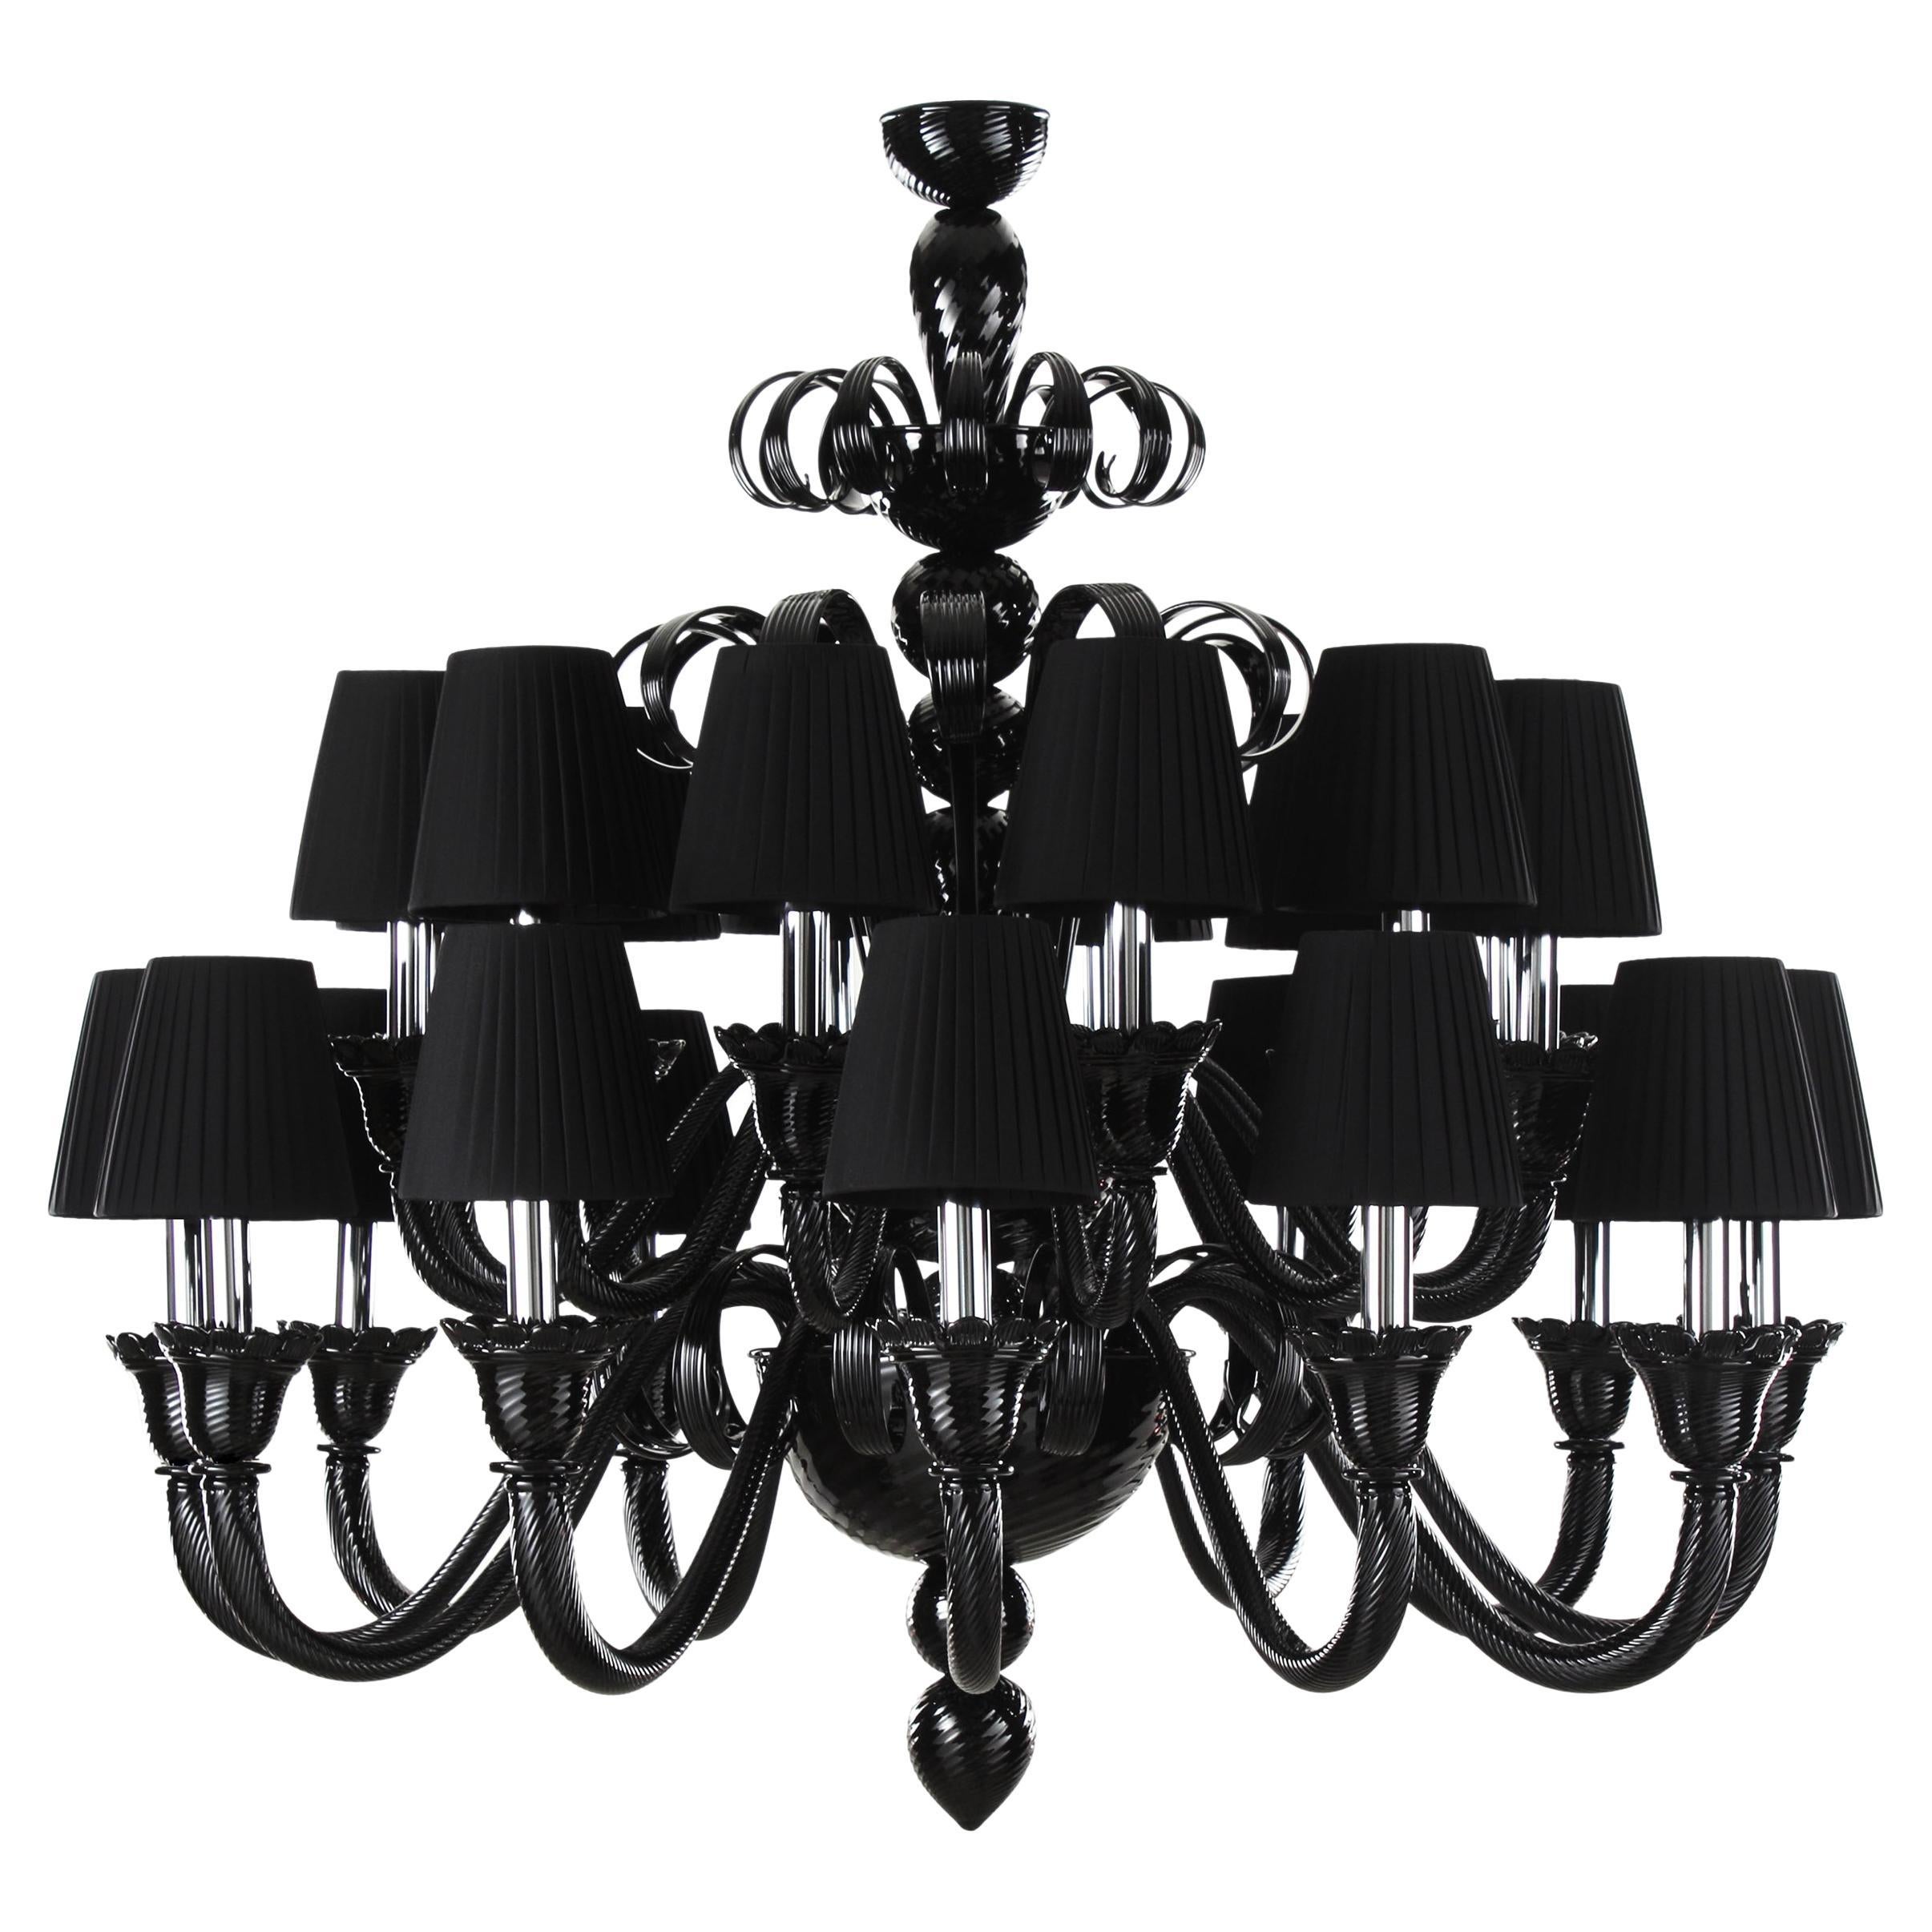 Artistic Chandelier 12+12 Arms Black Murano Glass, Lampshades IKO by Multiforme